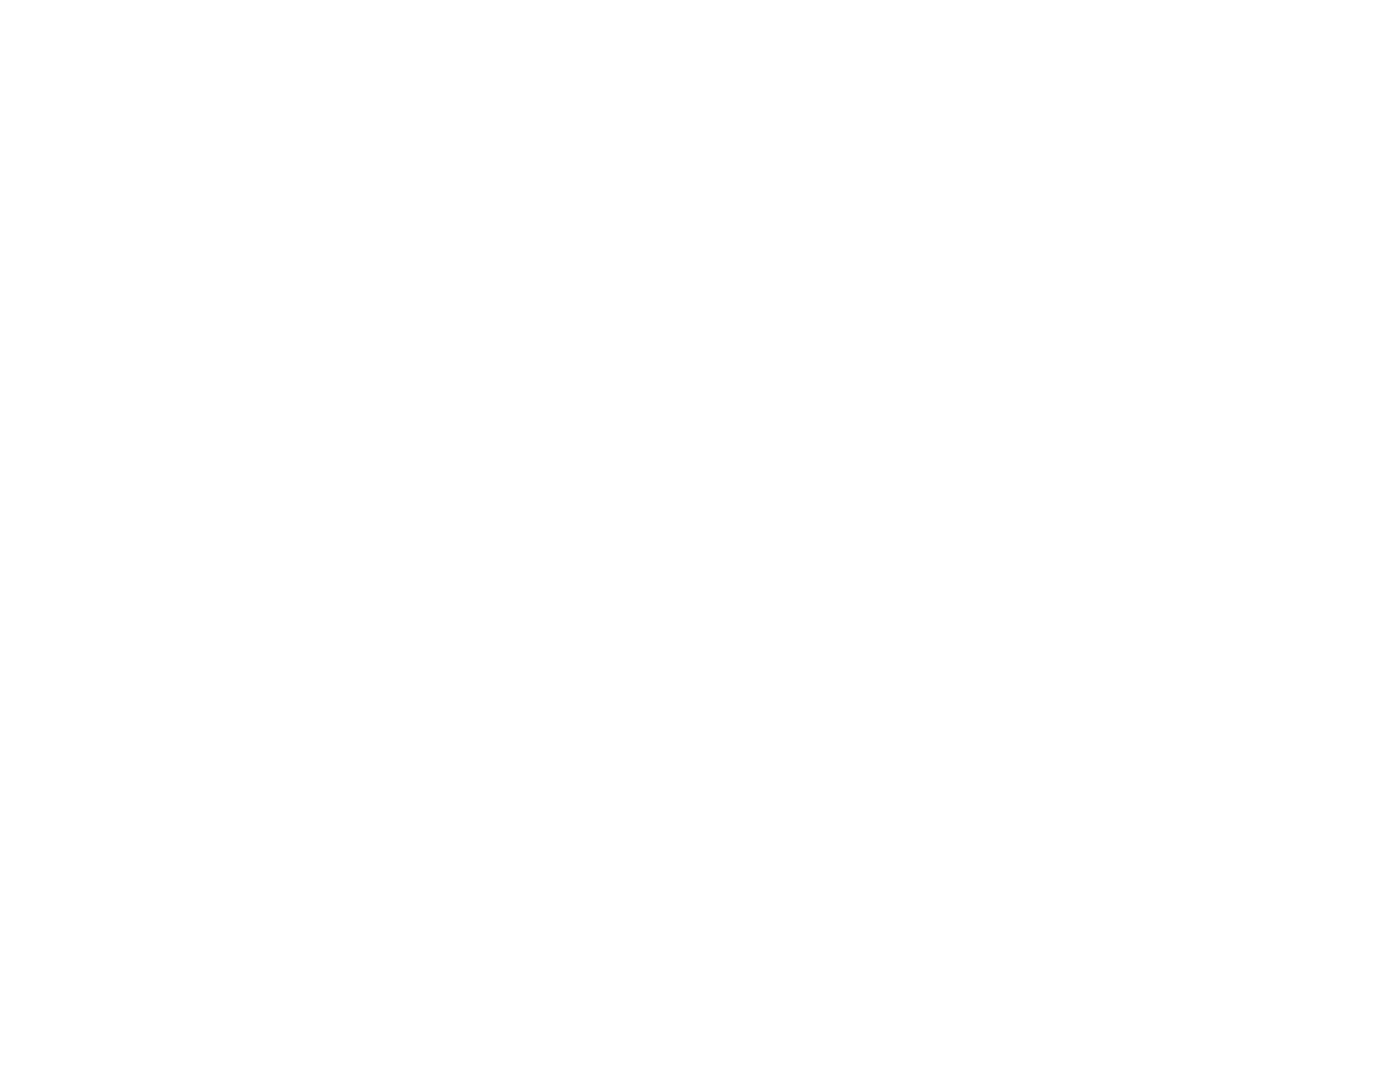 Rural Voices for Conservation Coalition